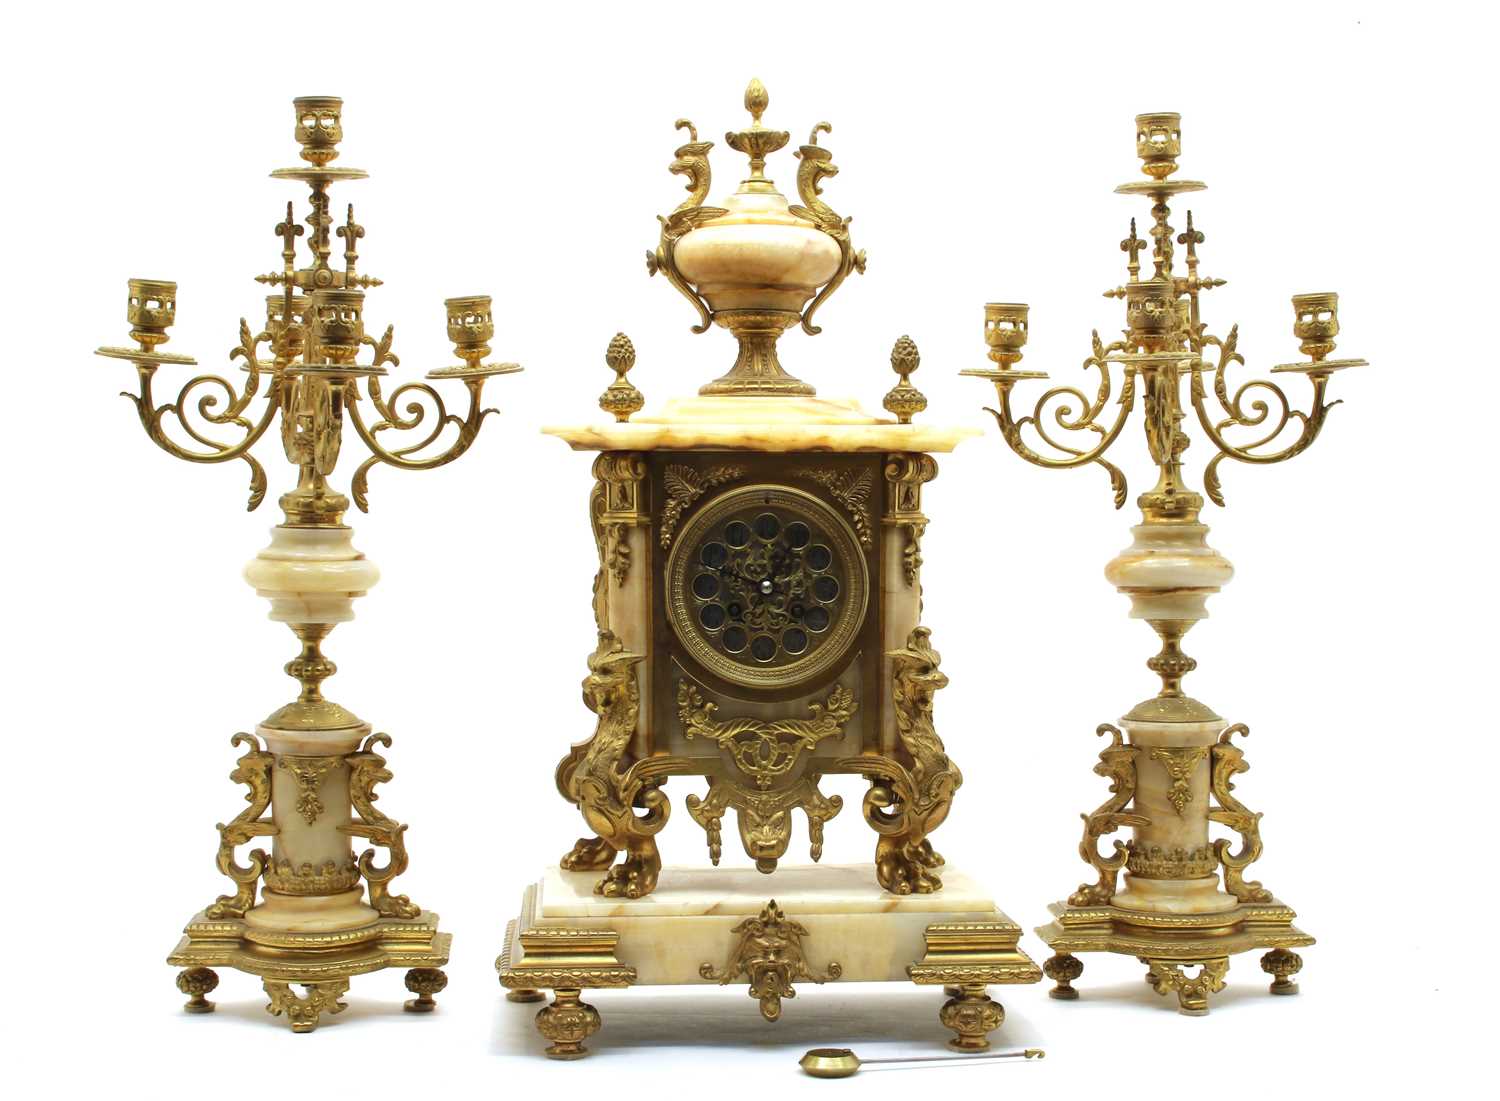 Lot 265 - A French ormolu and veined marble clock garniture